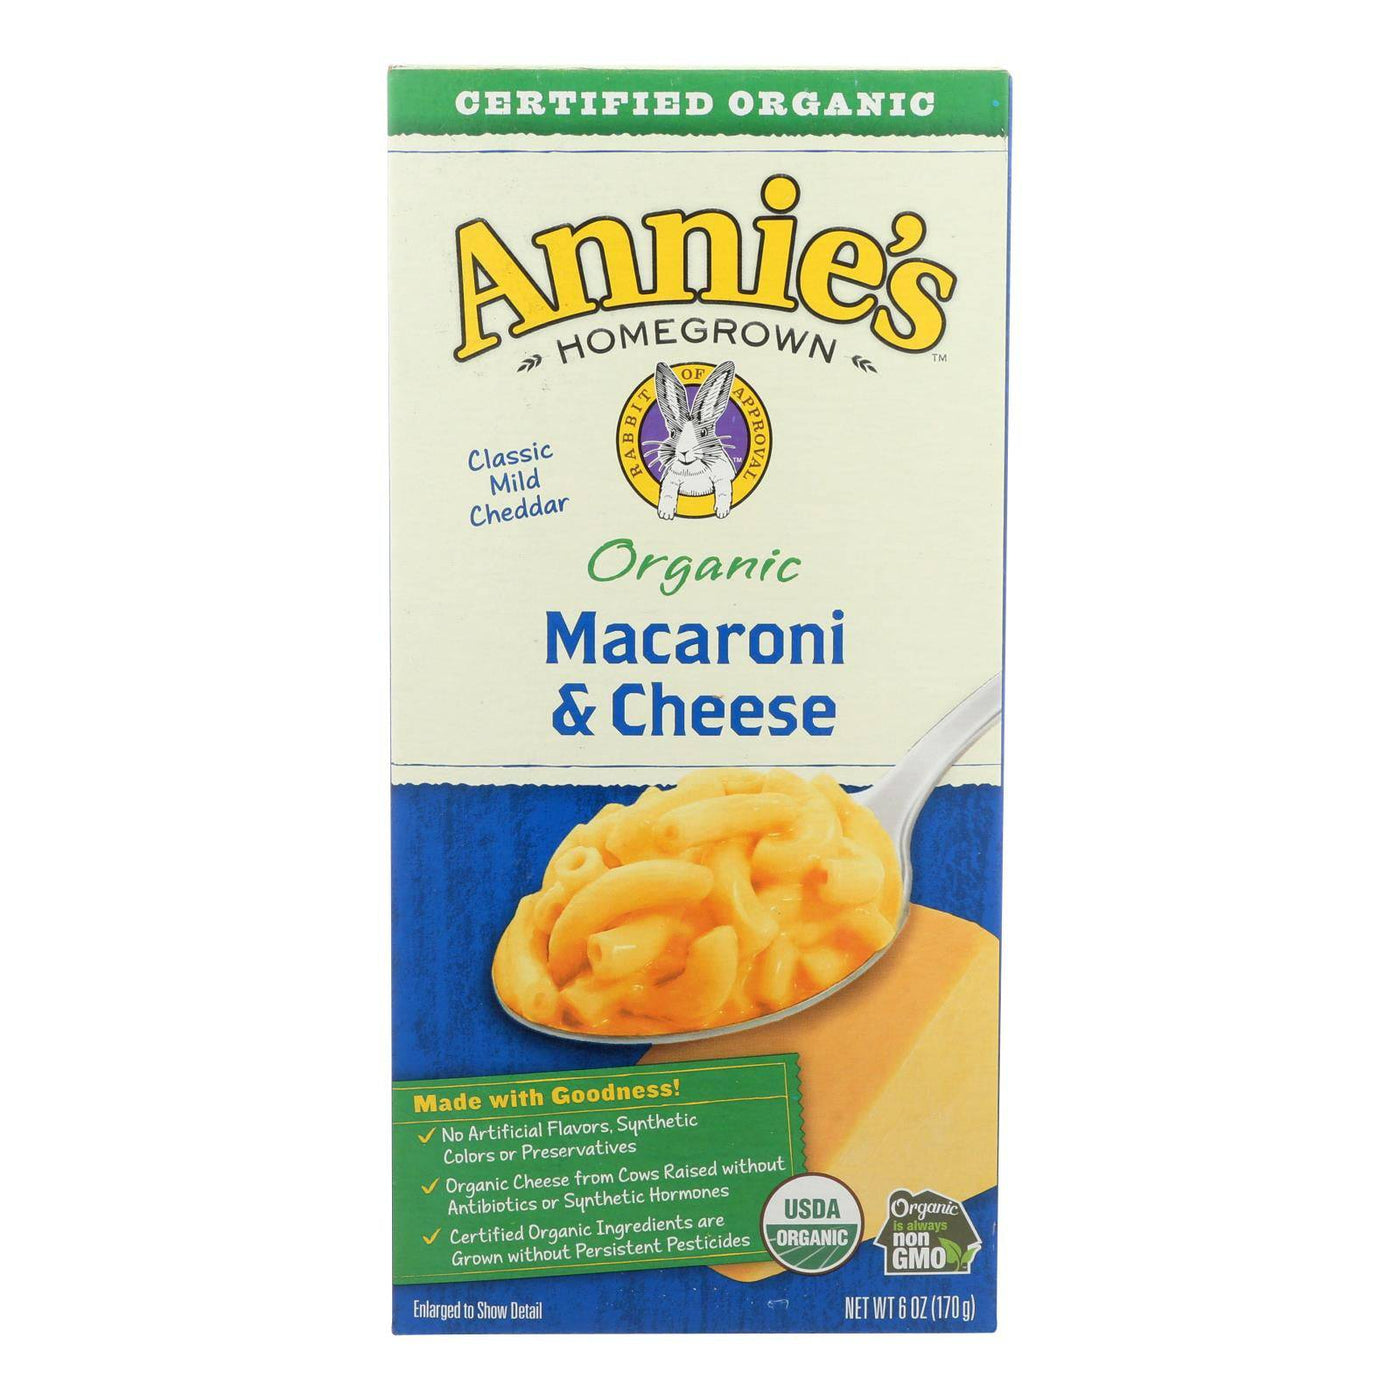 Buy Annies Homegrown Macaroni And Cheese - Organic - Classic - 6 Oz - Case Of 12  at OnlyNaturals.us